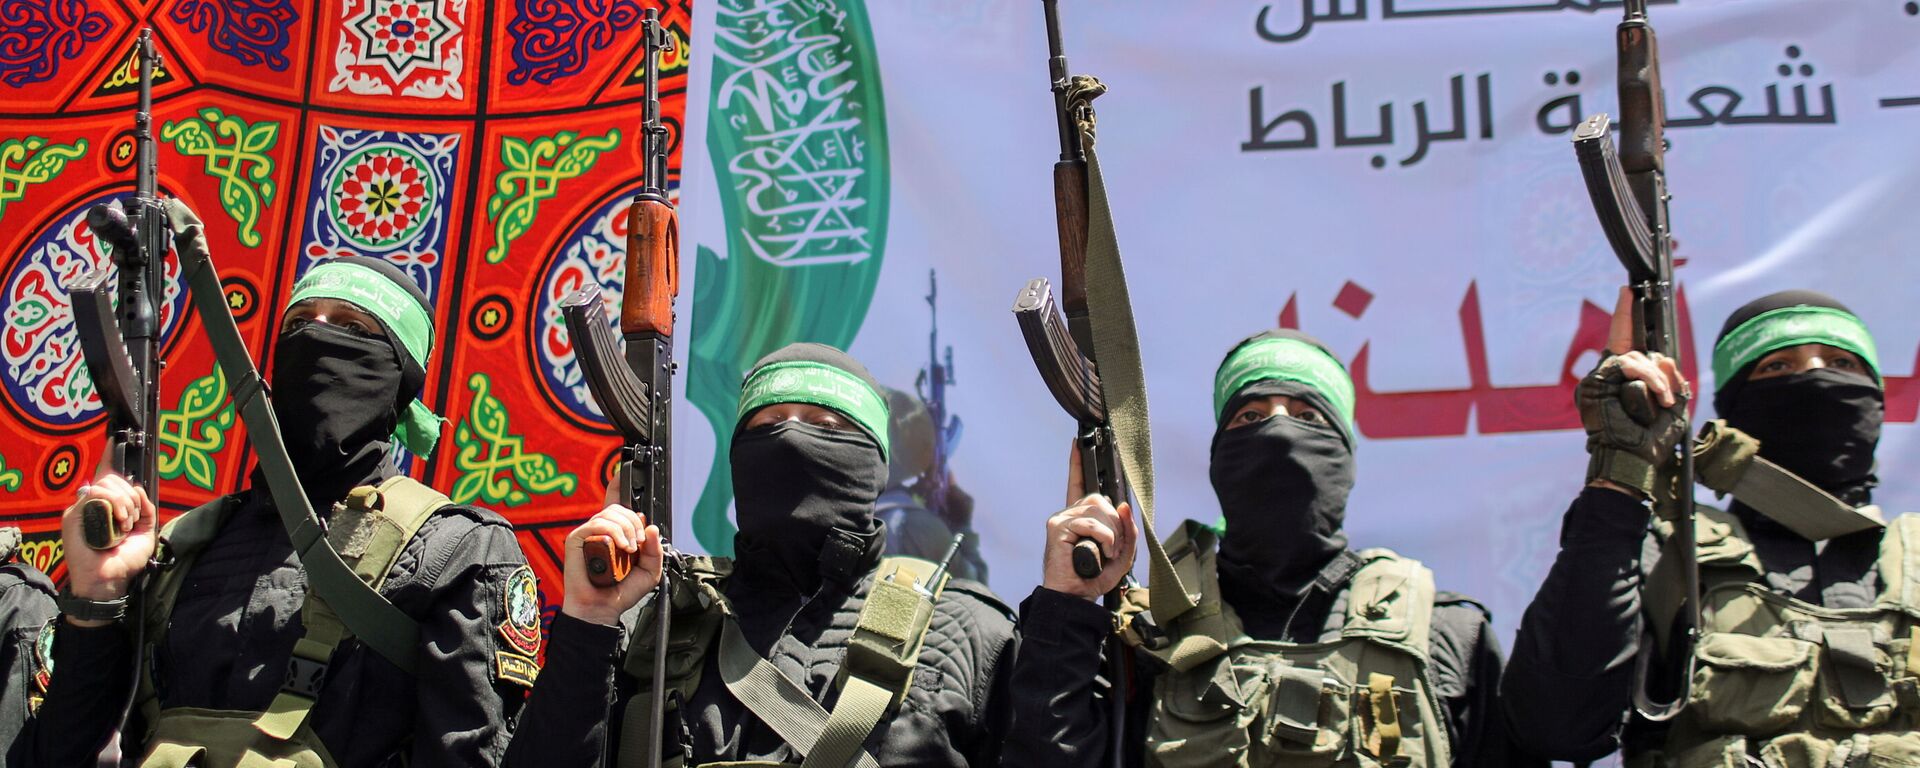 Palestinian Hamas militants take part in a protest over the possible eviction of several Palestinian families from homes on land claimed by Jewish settlers in the Jerusalem's Sheikh Jarrah neighbourhood, in the northern Gaza Strip May 7, 2021 - Sputnik International, 1920, 19.05.2021